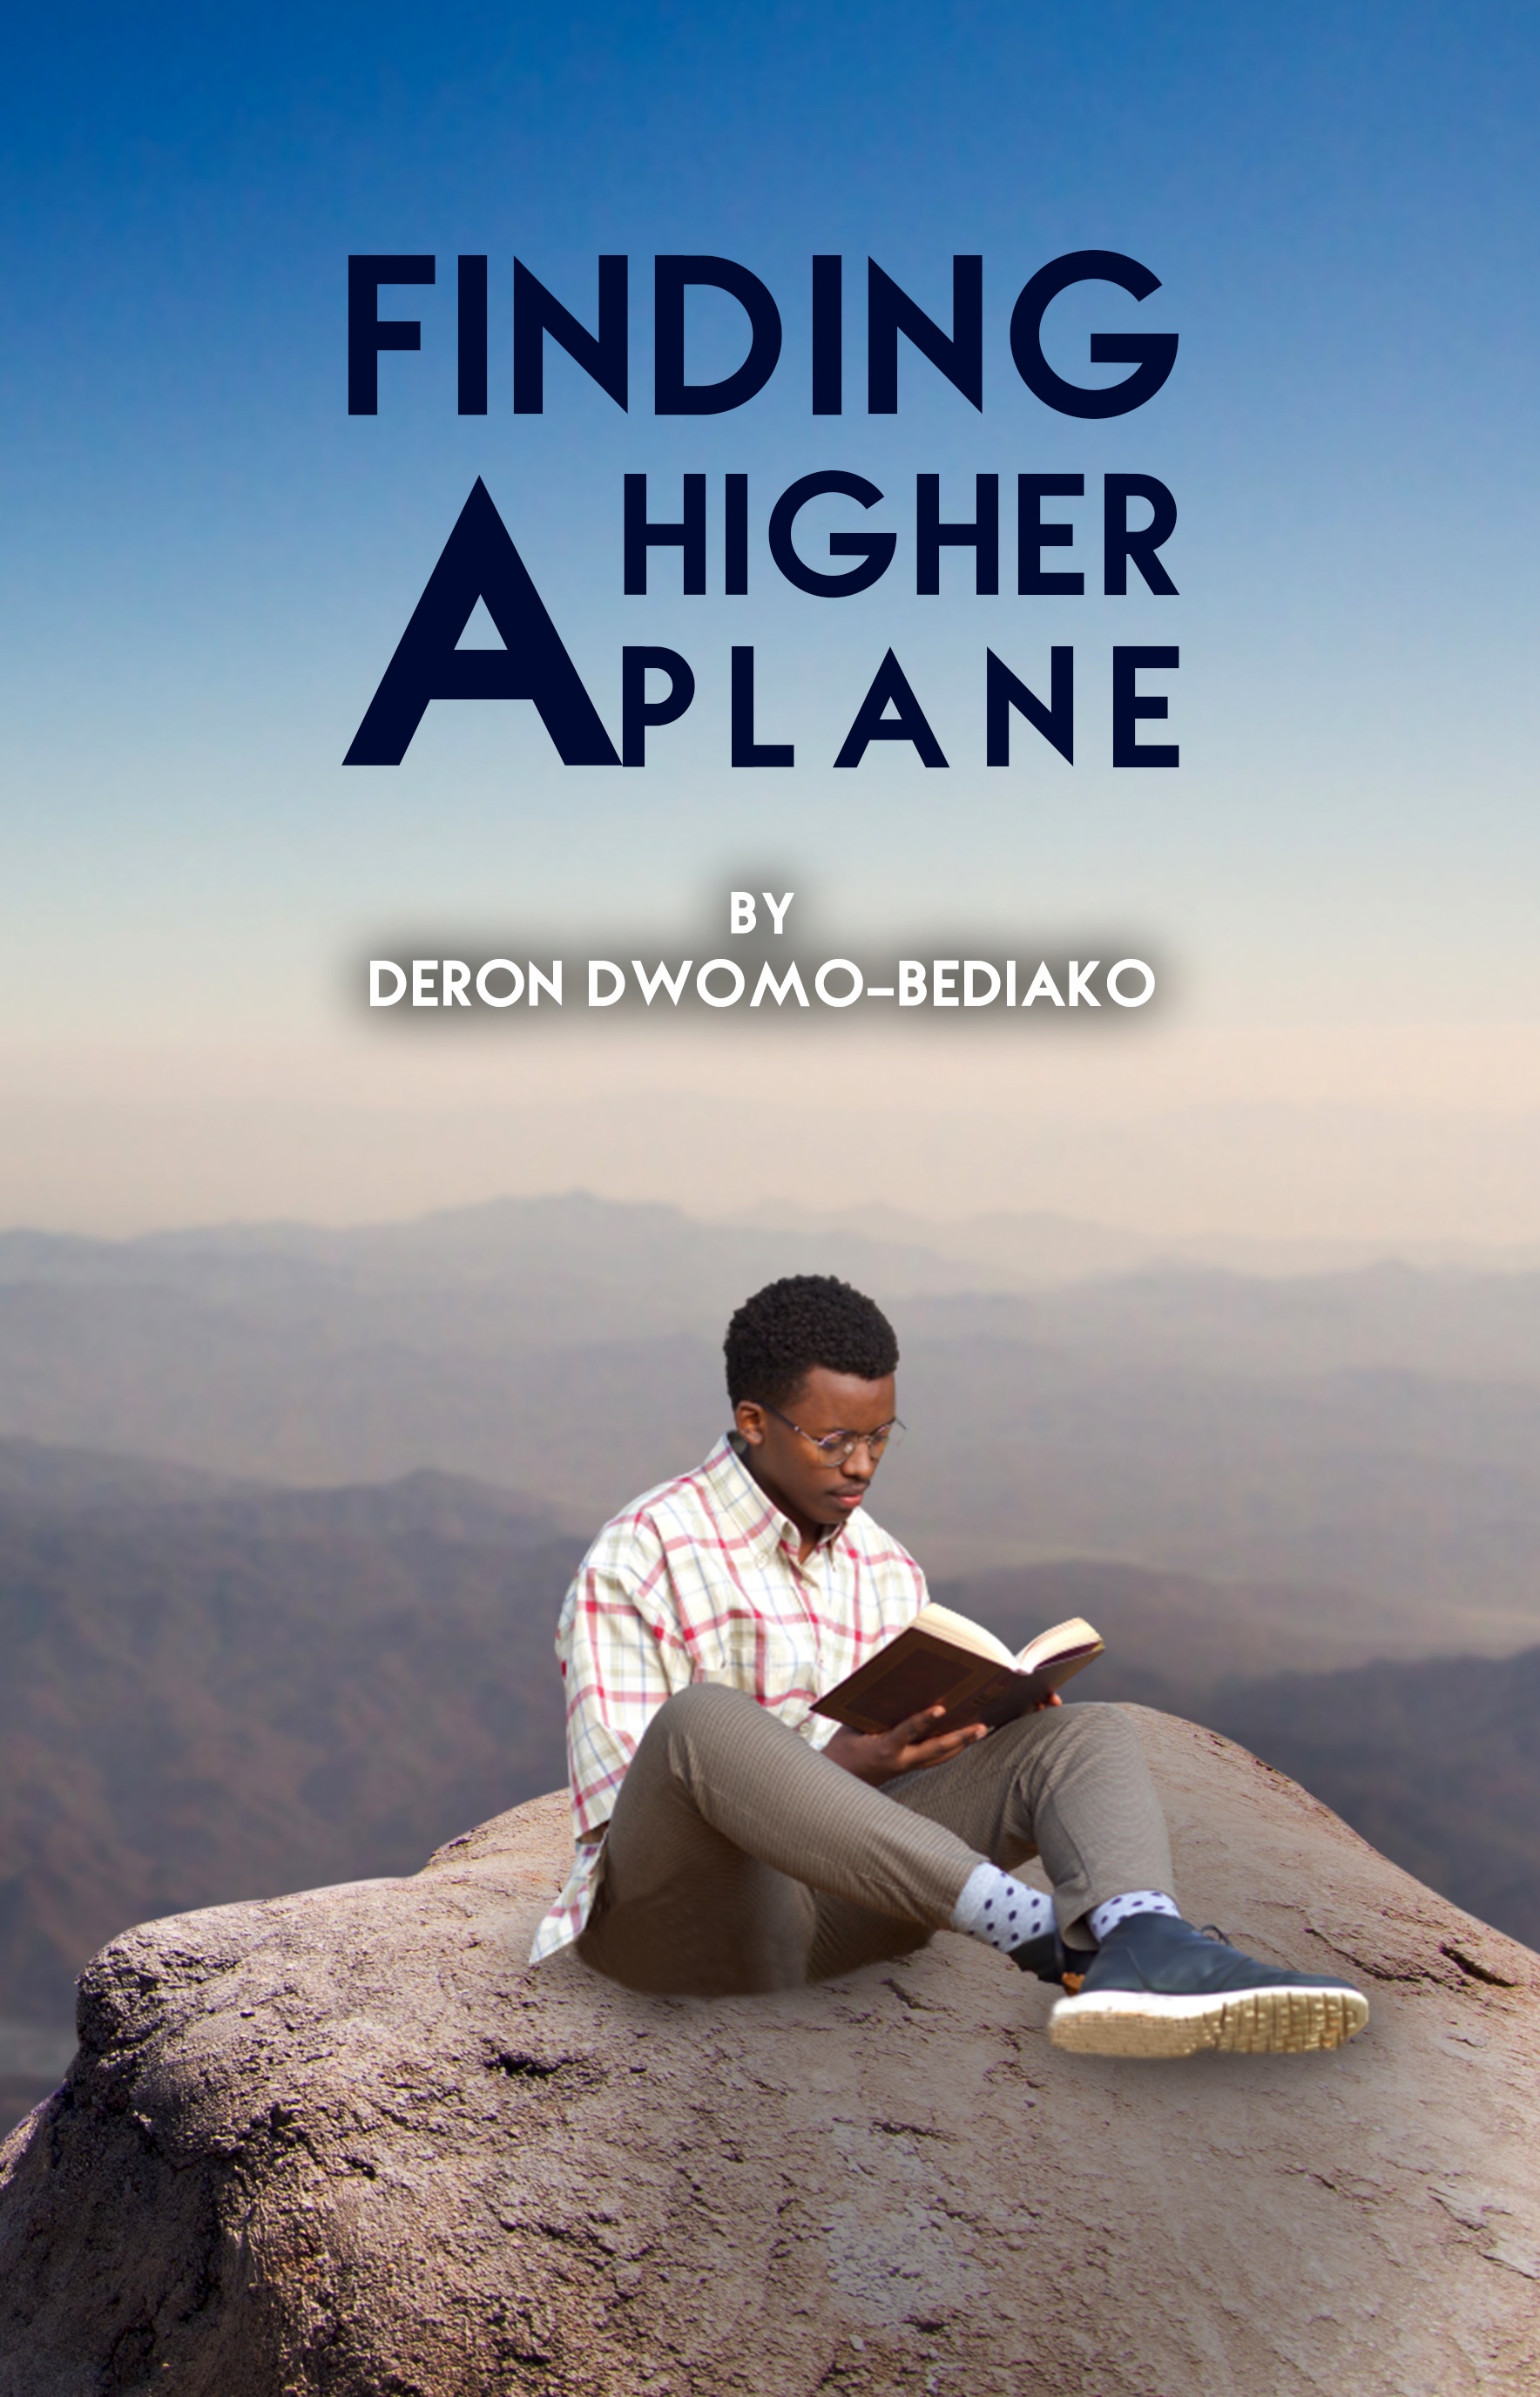 Finding a Higher Plane Educates Christians about Incarnation, Atonement, and the Apocalypse